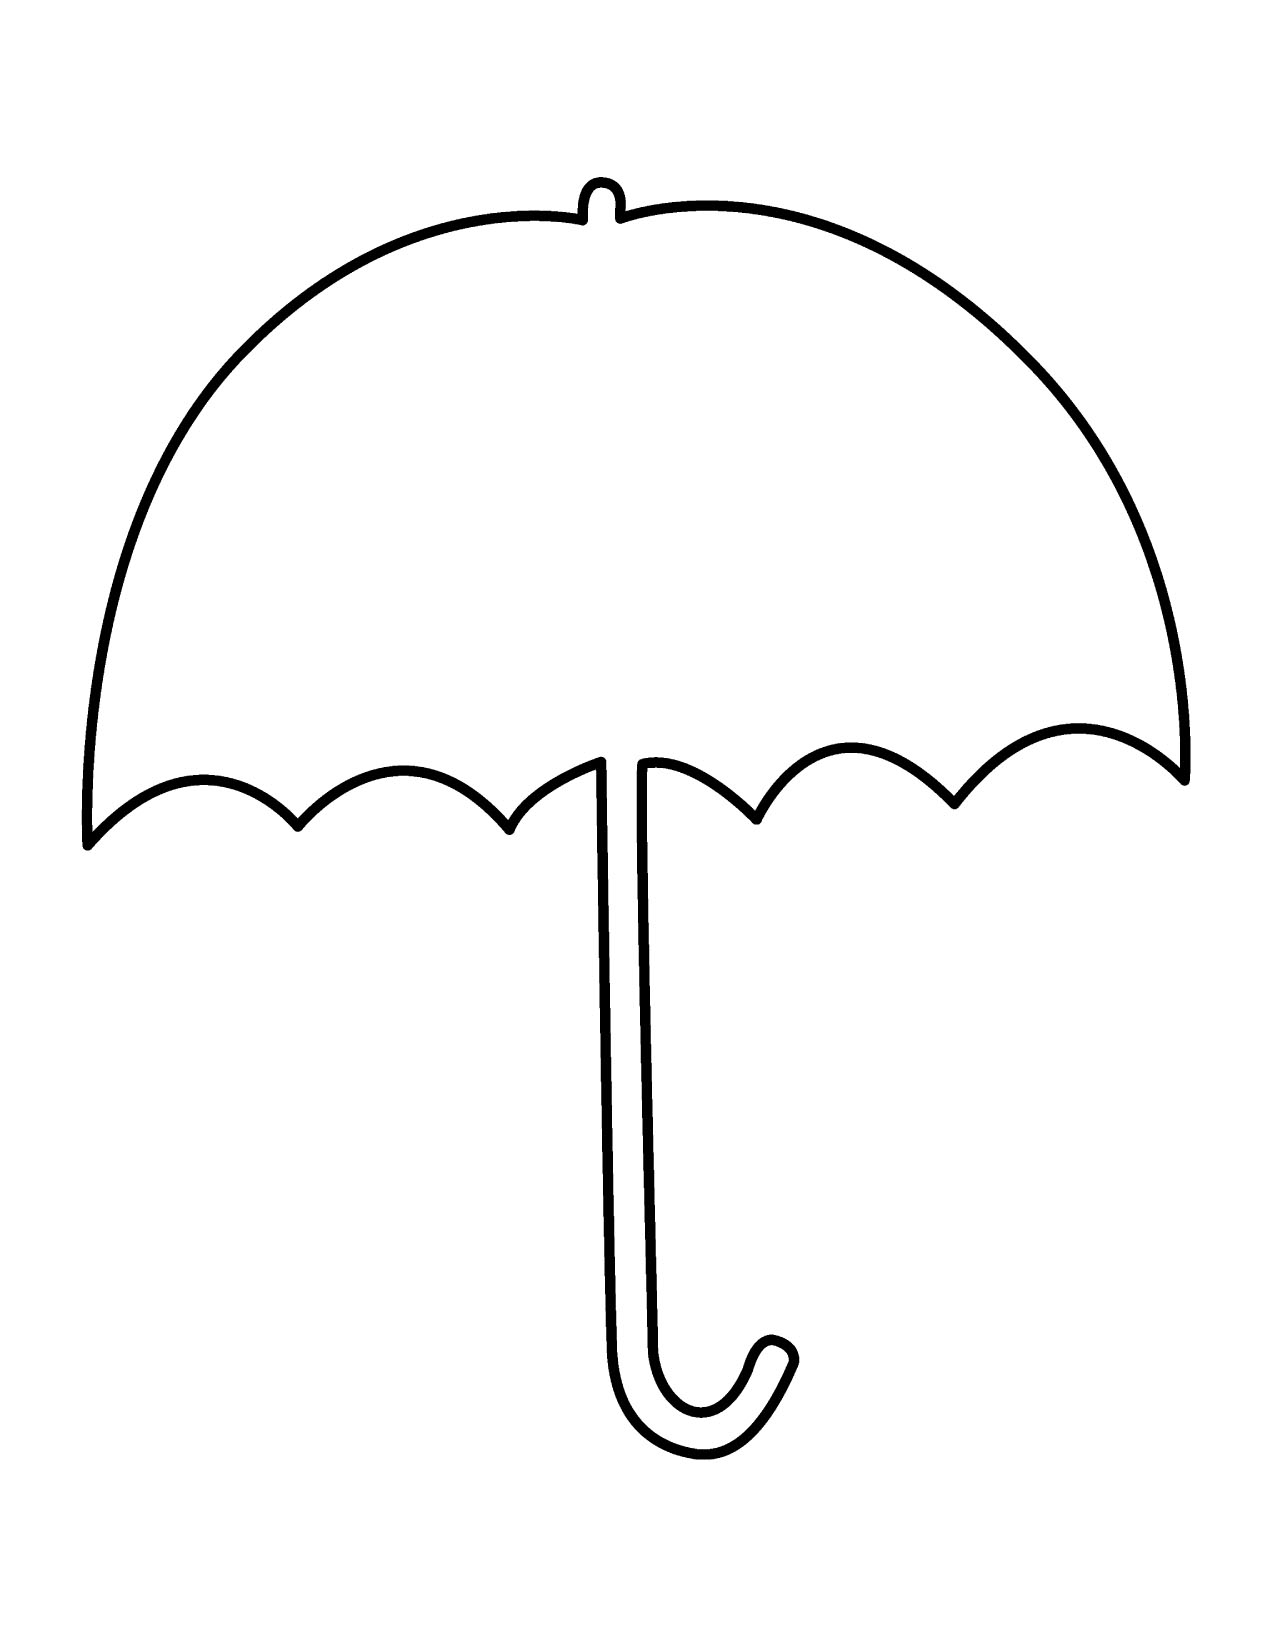 Best Photos of Umbrella Coloring Pages To Print - Coloring Page ...